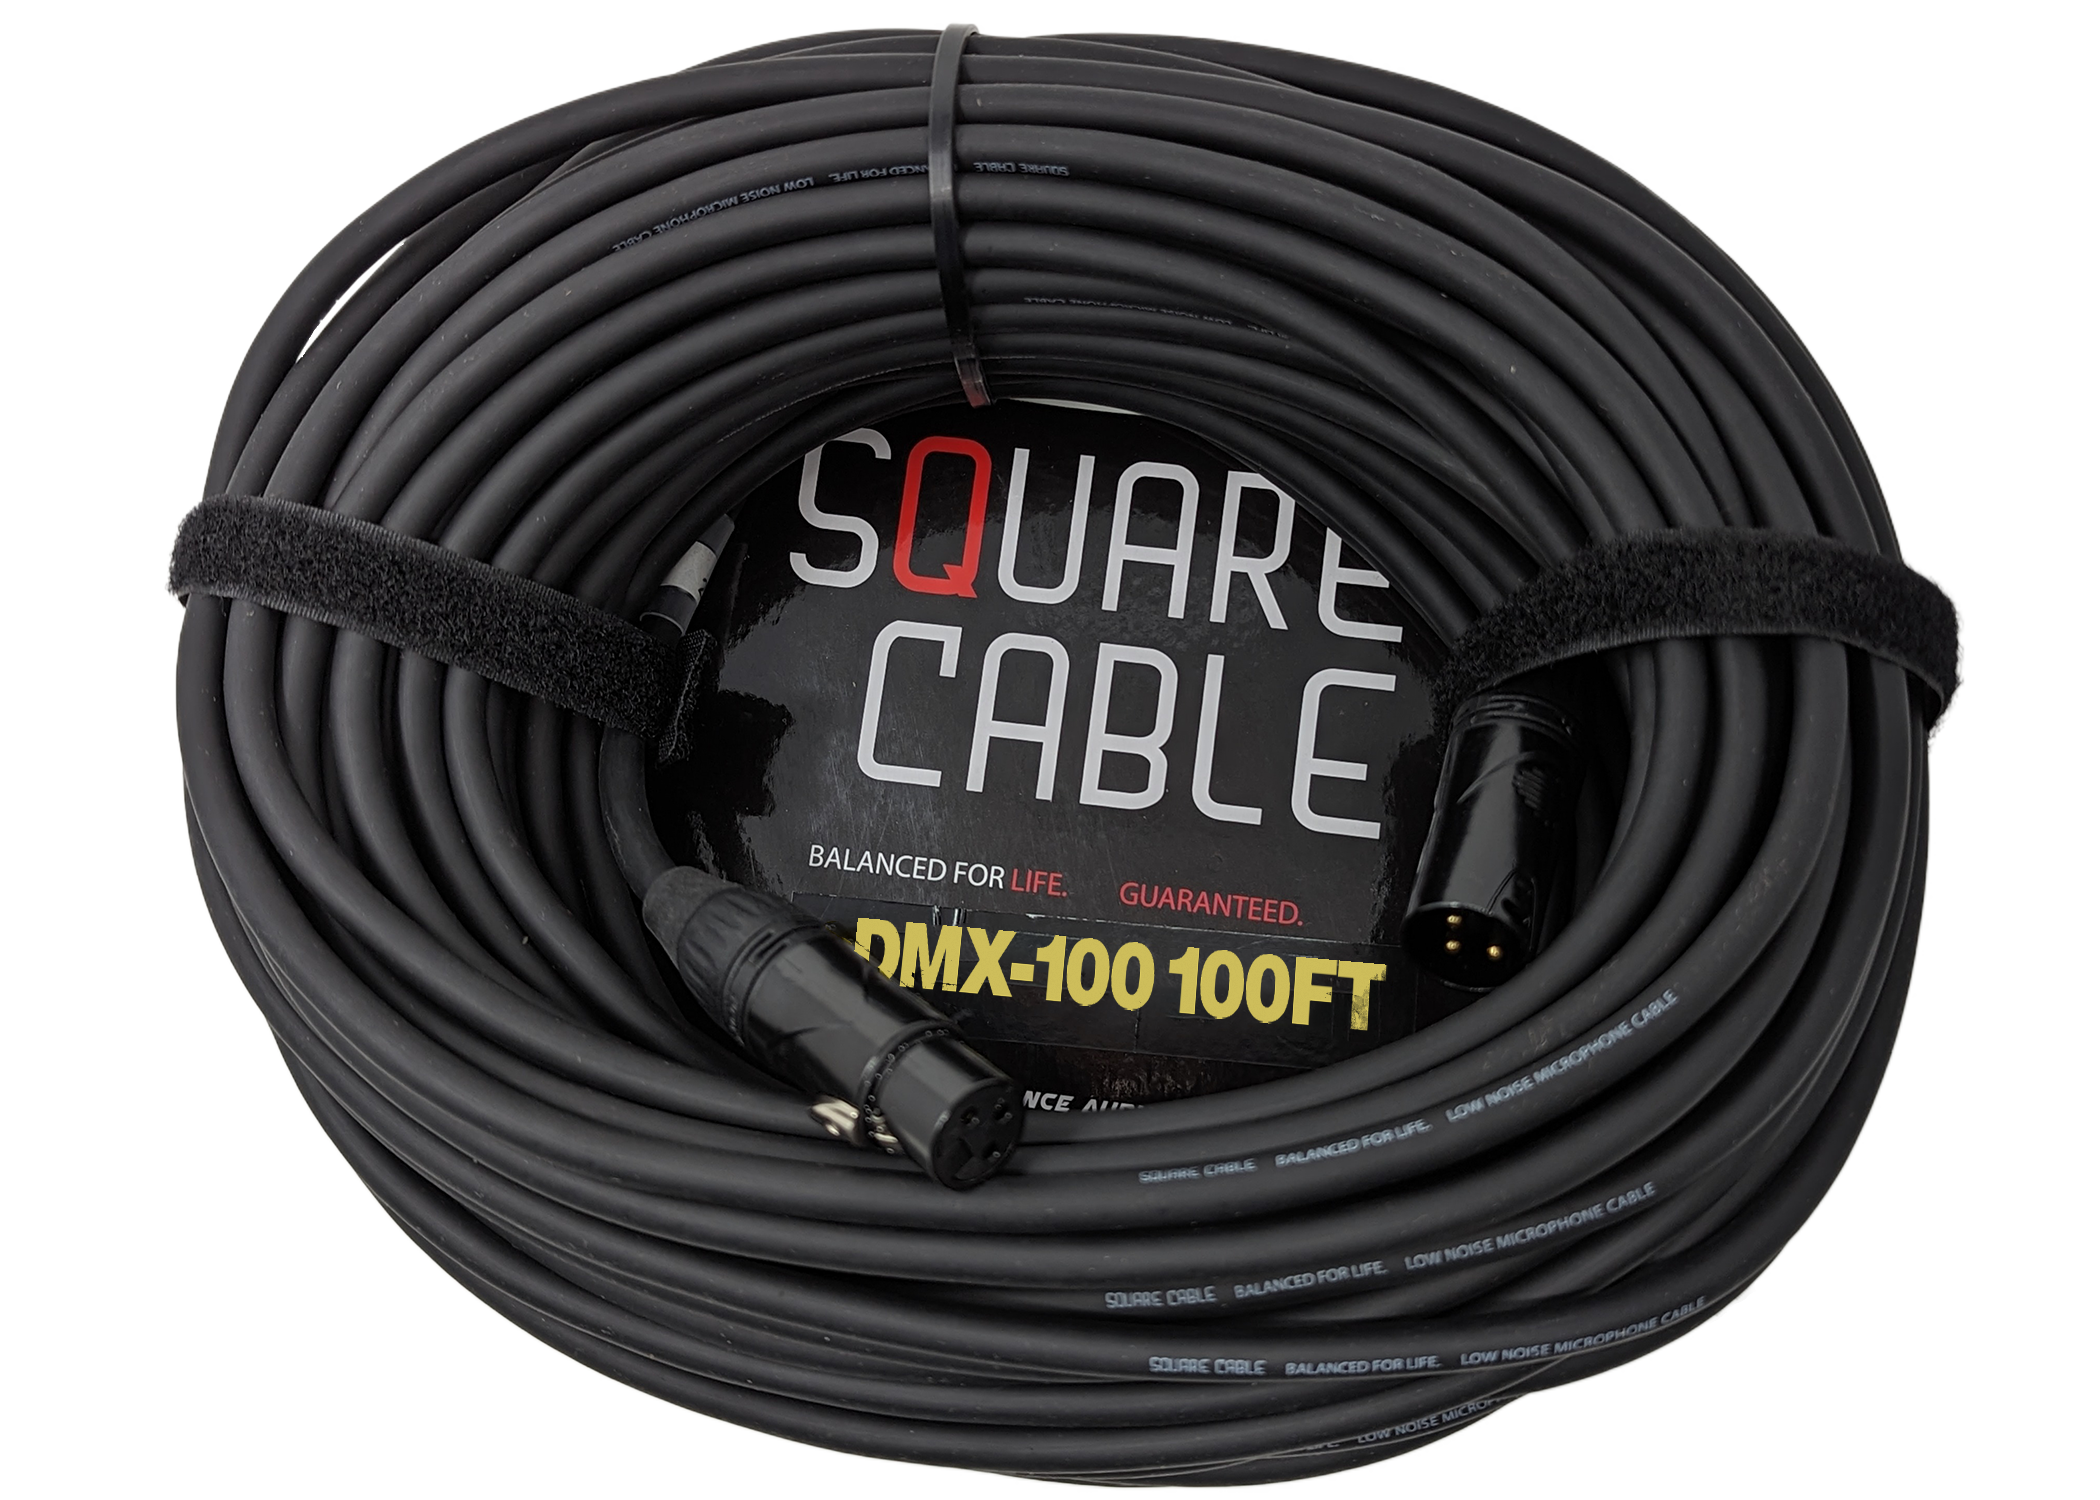 Square Cable DMX-100 | 100ft DMX Cable (3-Pin)